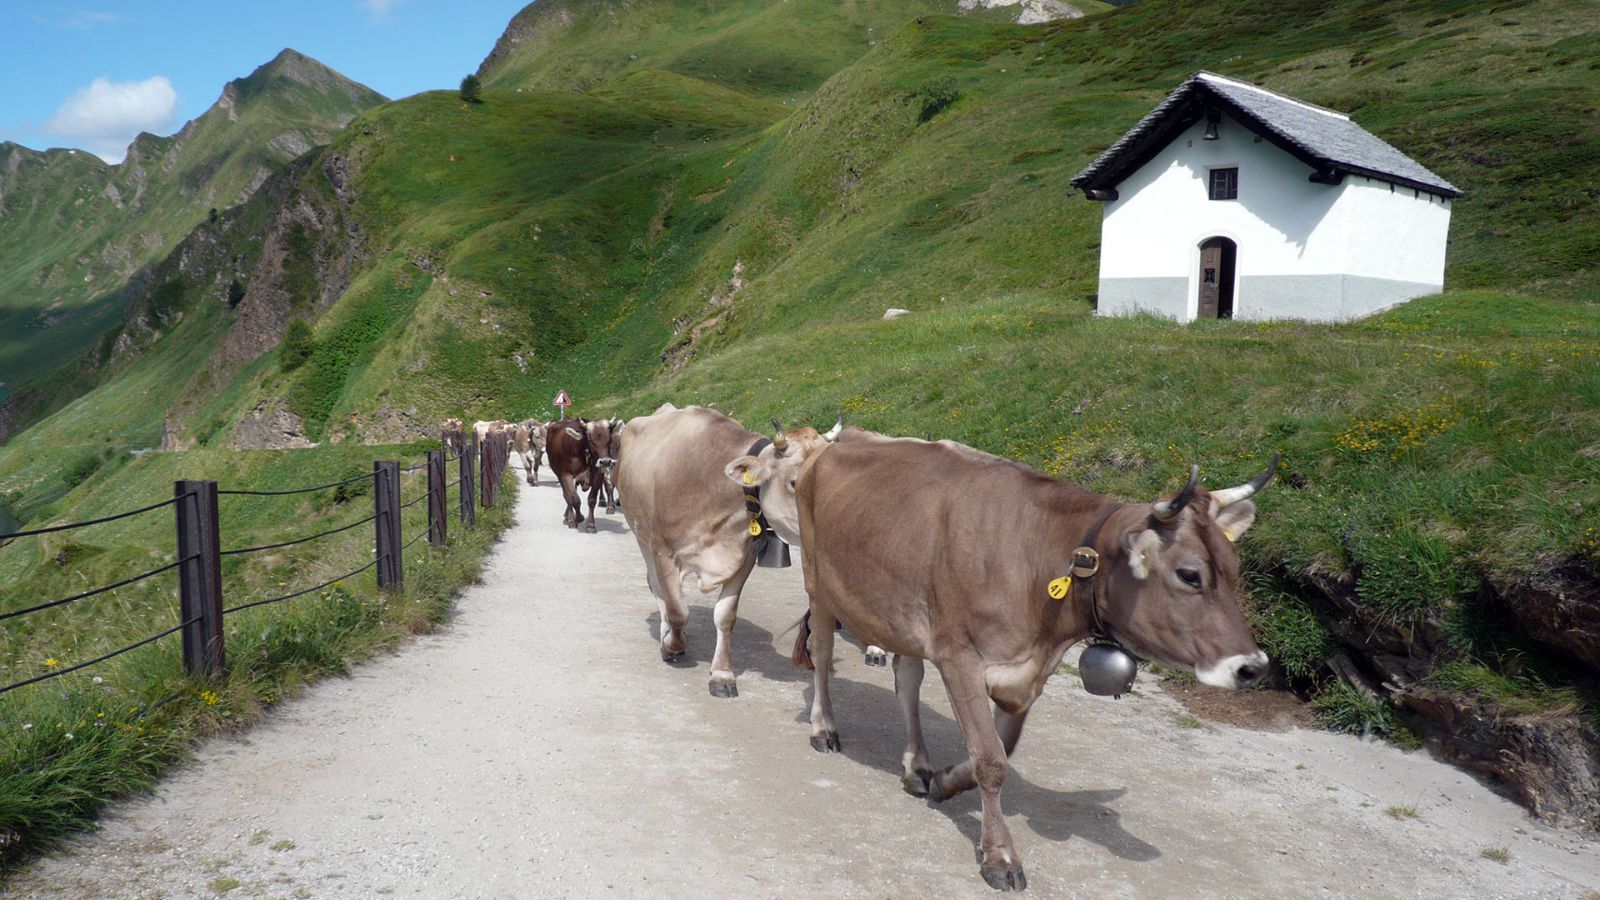 Cows on the way to the alp, lake Ritom